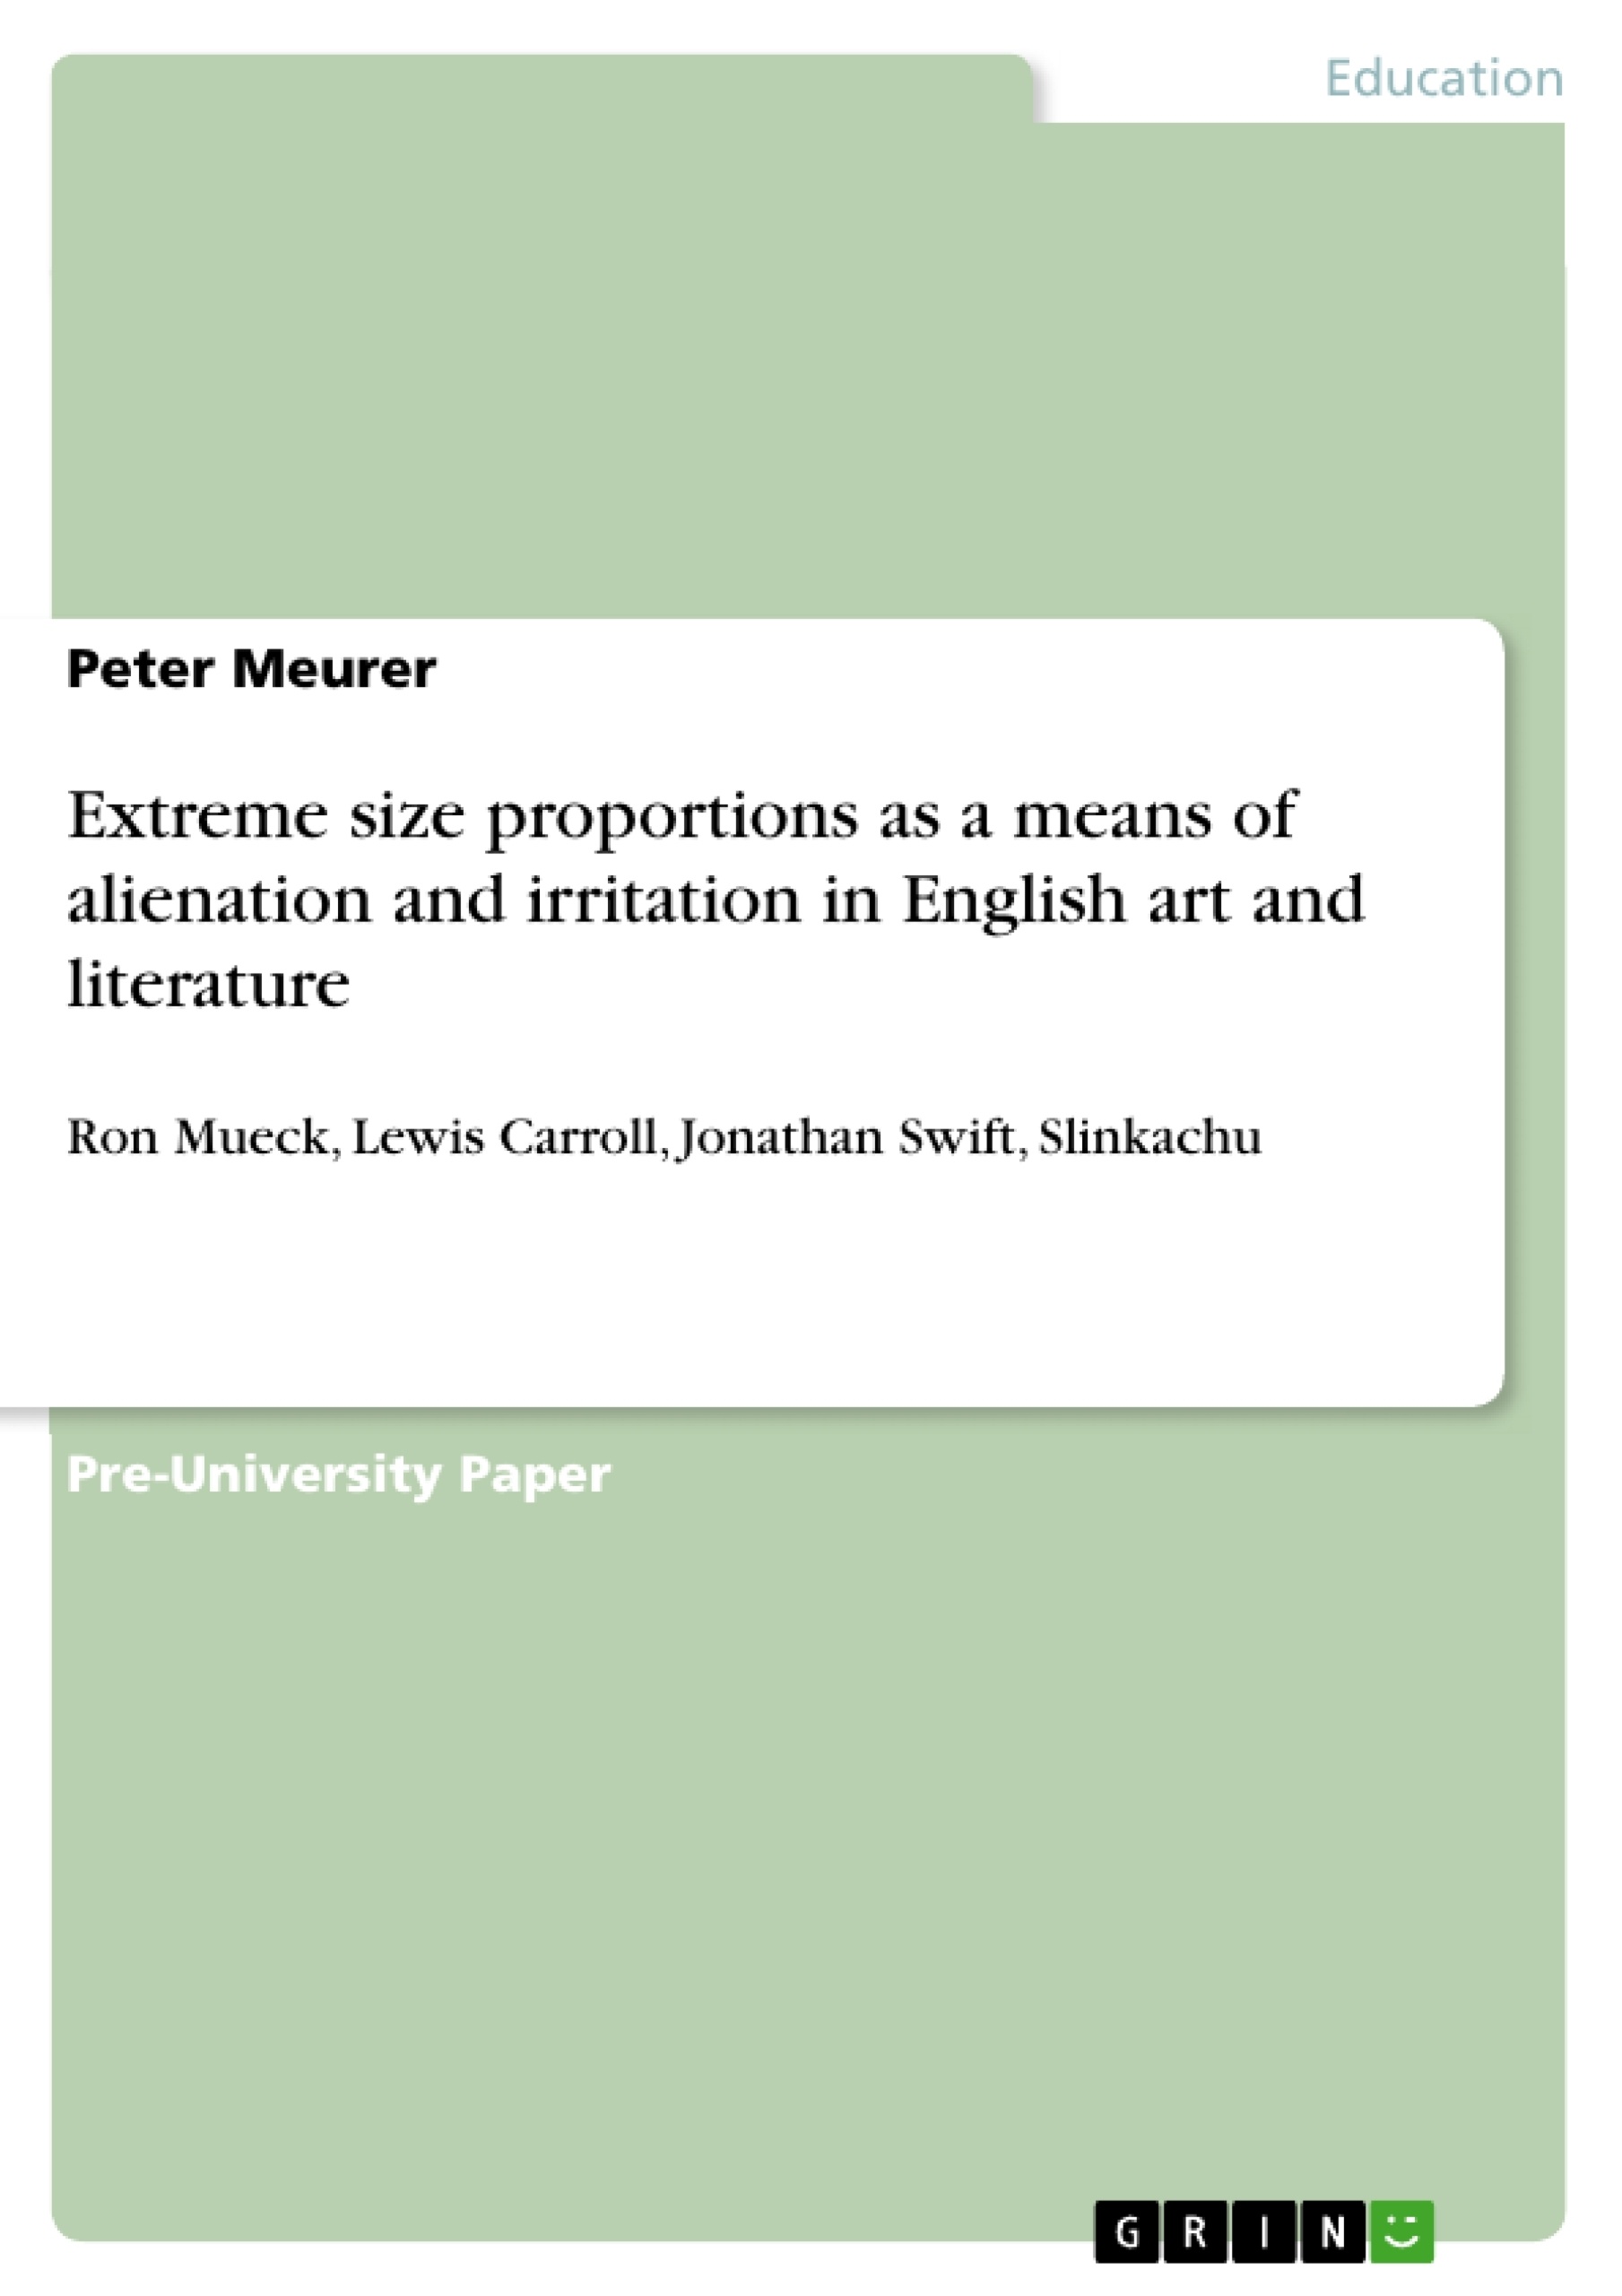 Titre: Extreme size proportions as a means of alienation and irritation in English art and literature